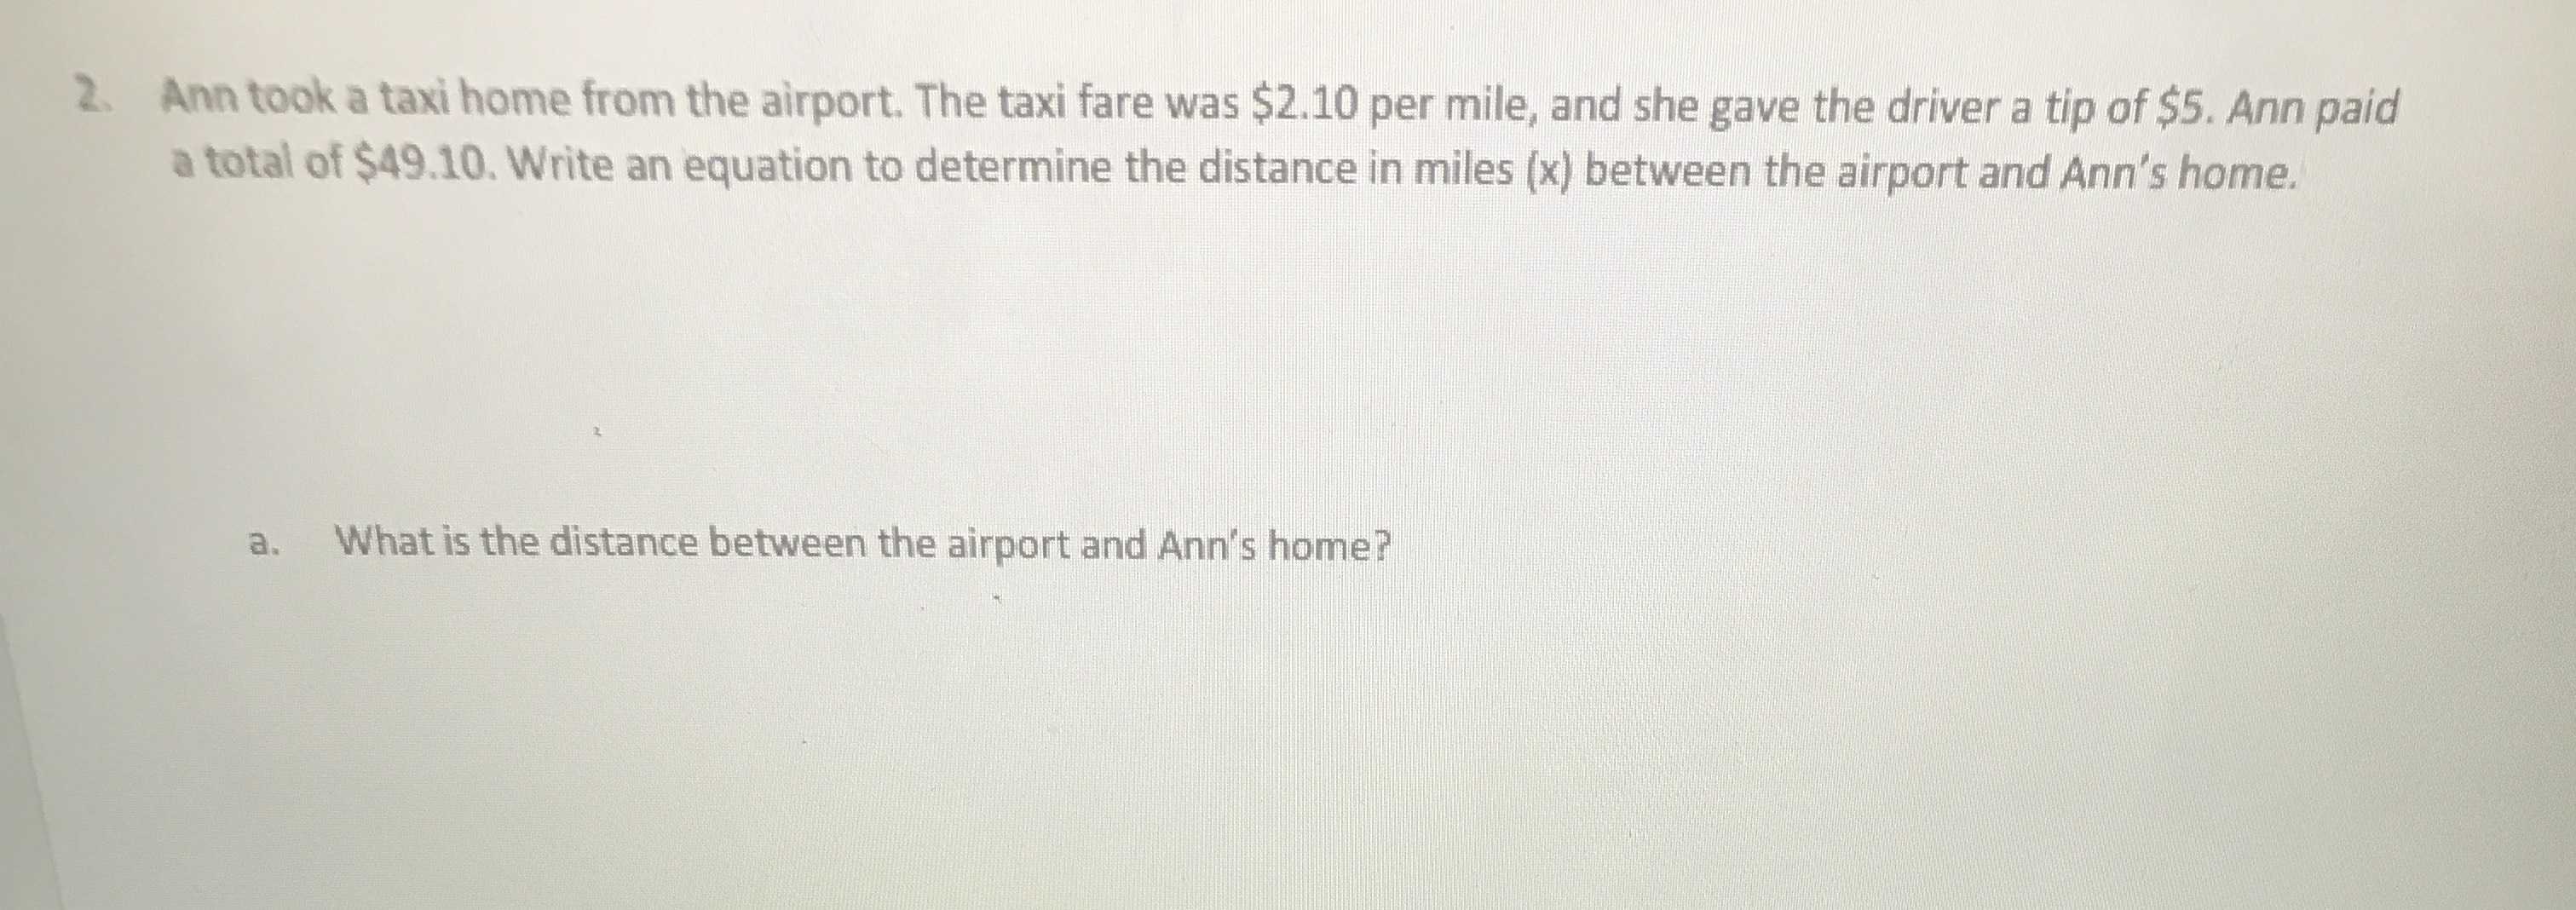 2. Ann took a taxi home from the airport. The taxi...